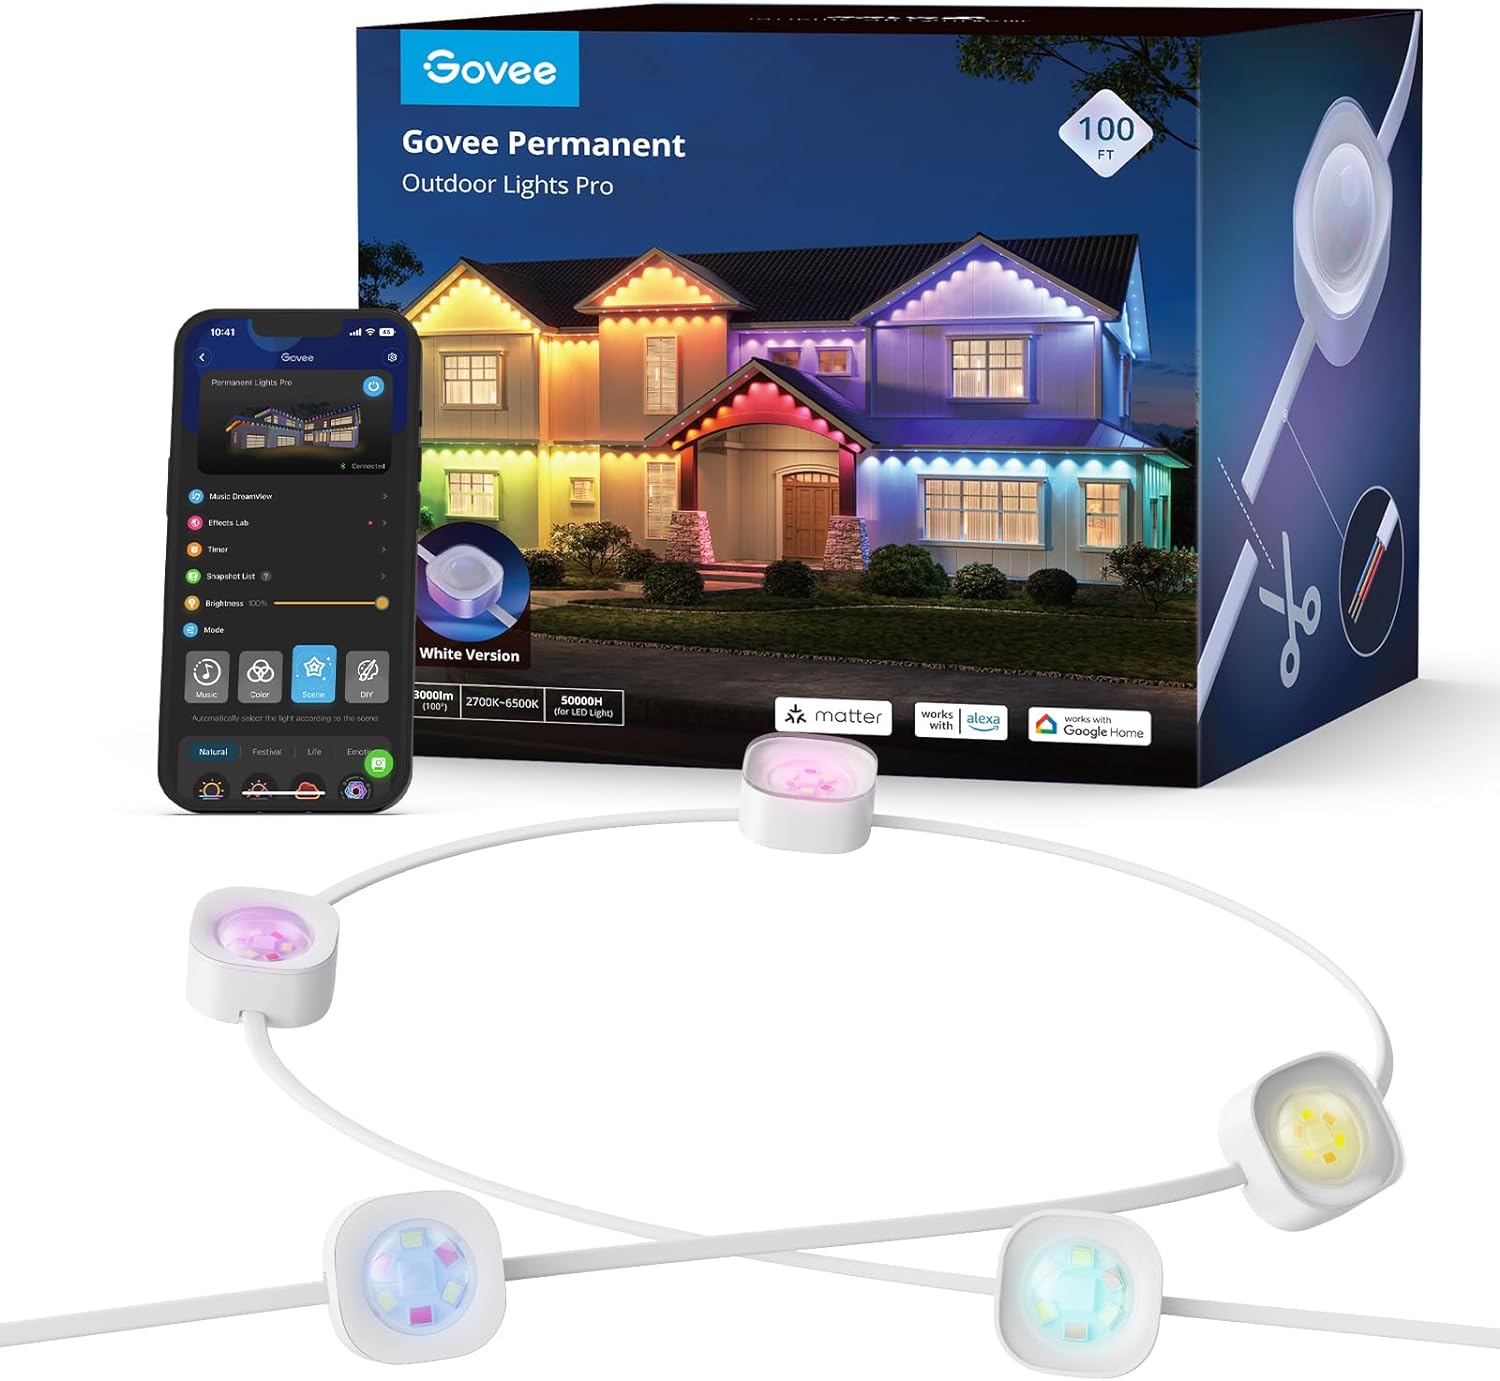 Govee permanent outdoor lights pro product